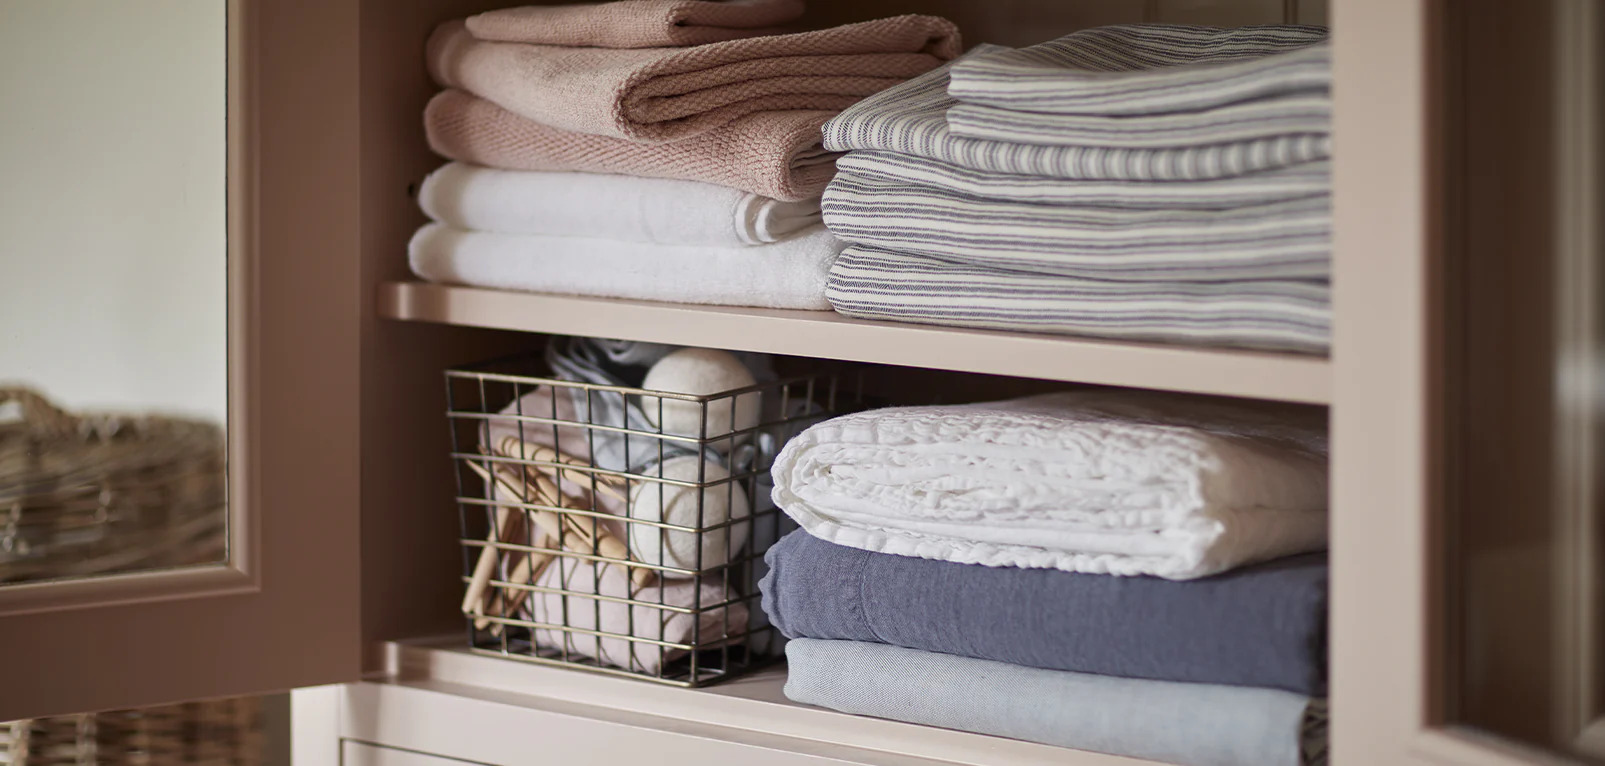 How To Store Sheets To Keep Them Fresh